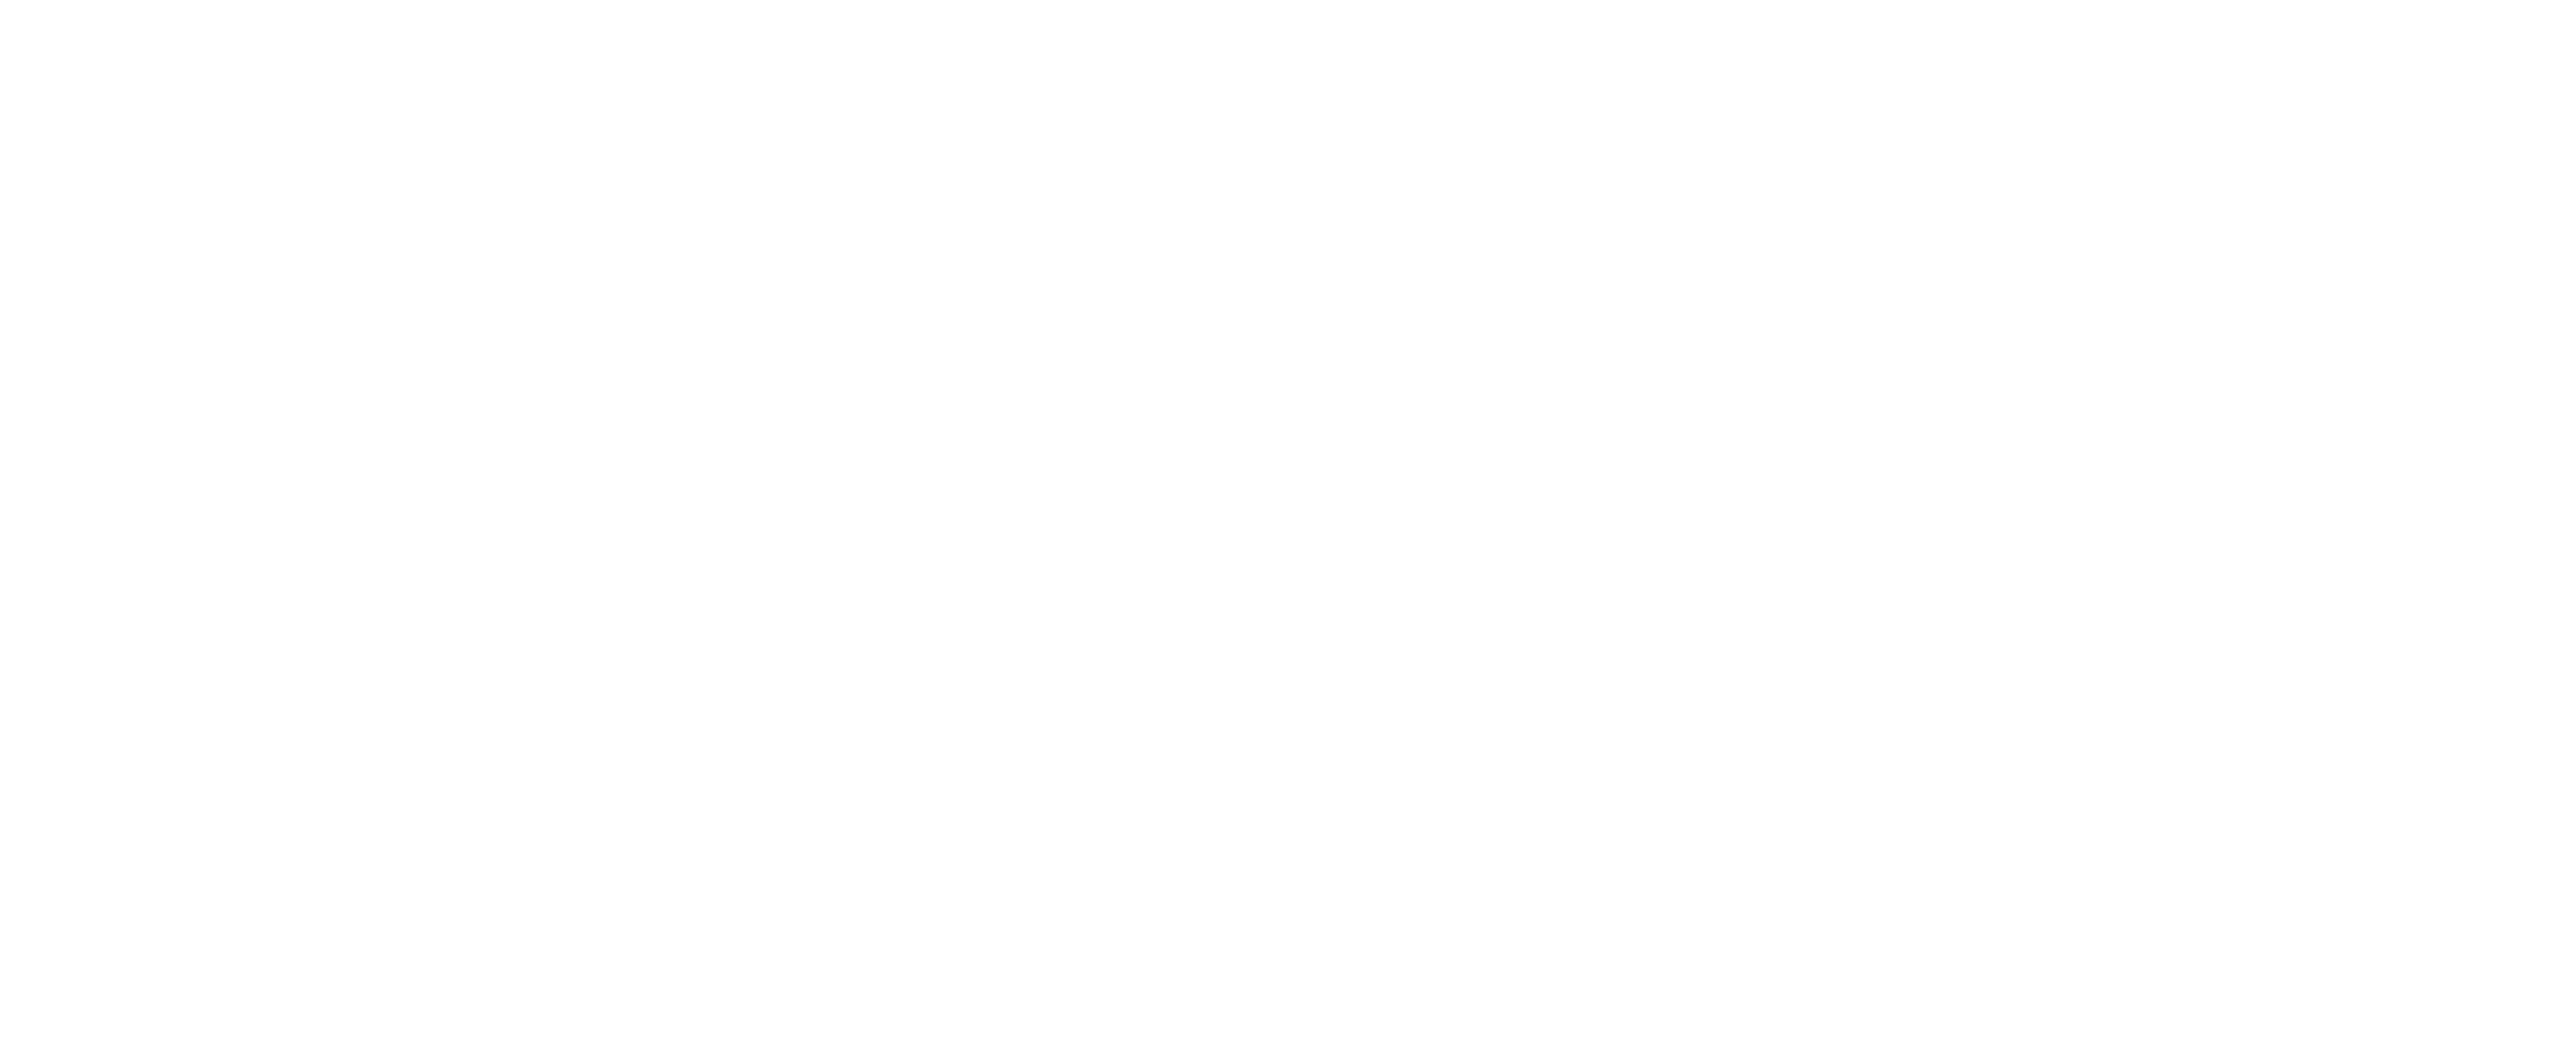 AFSCME Logo - AFSCME. The AFSCME Difference: How Thousands of Workers Are Finding